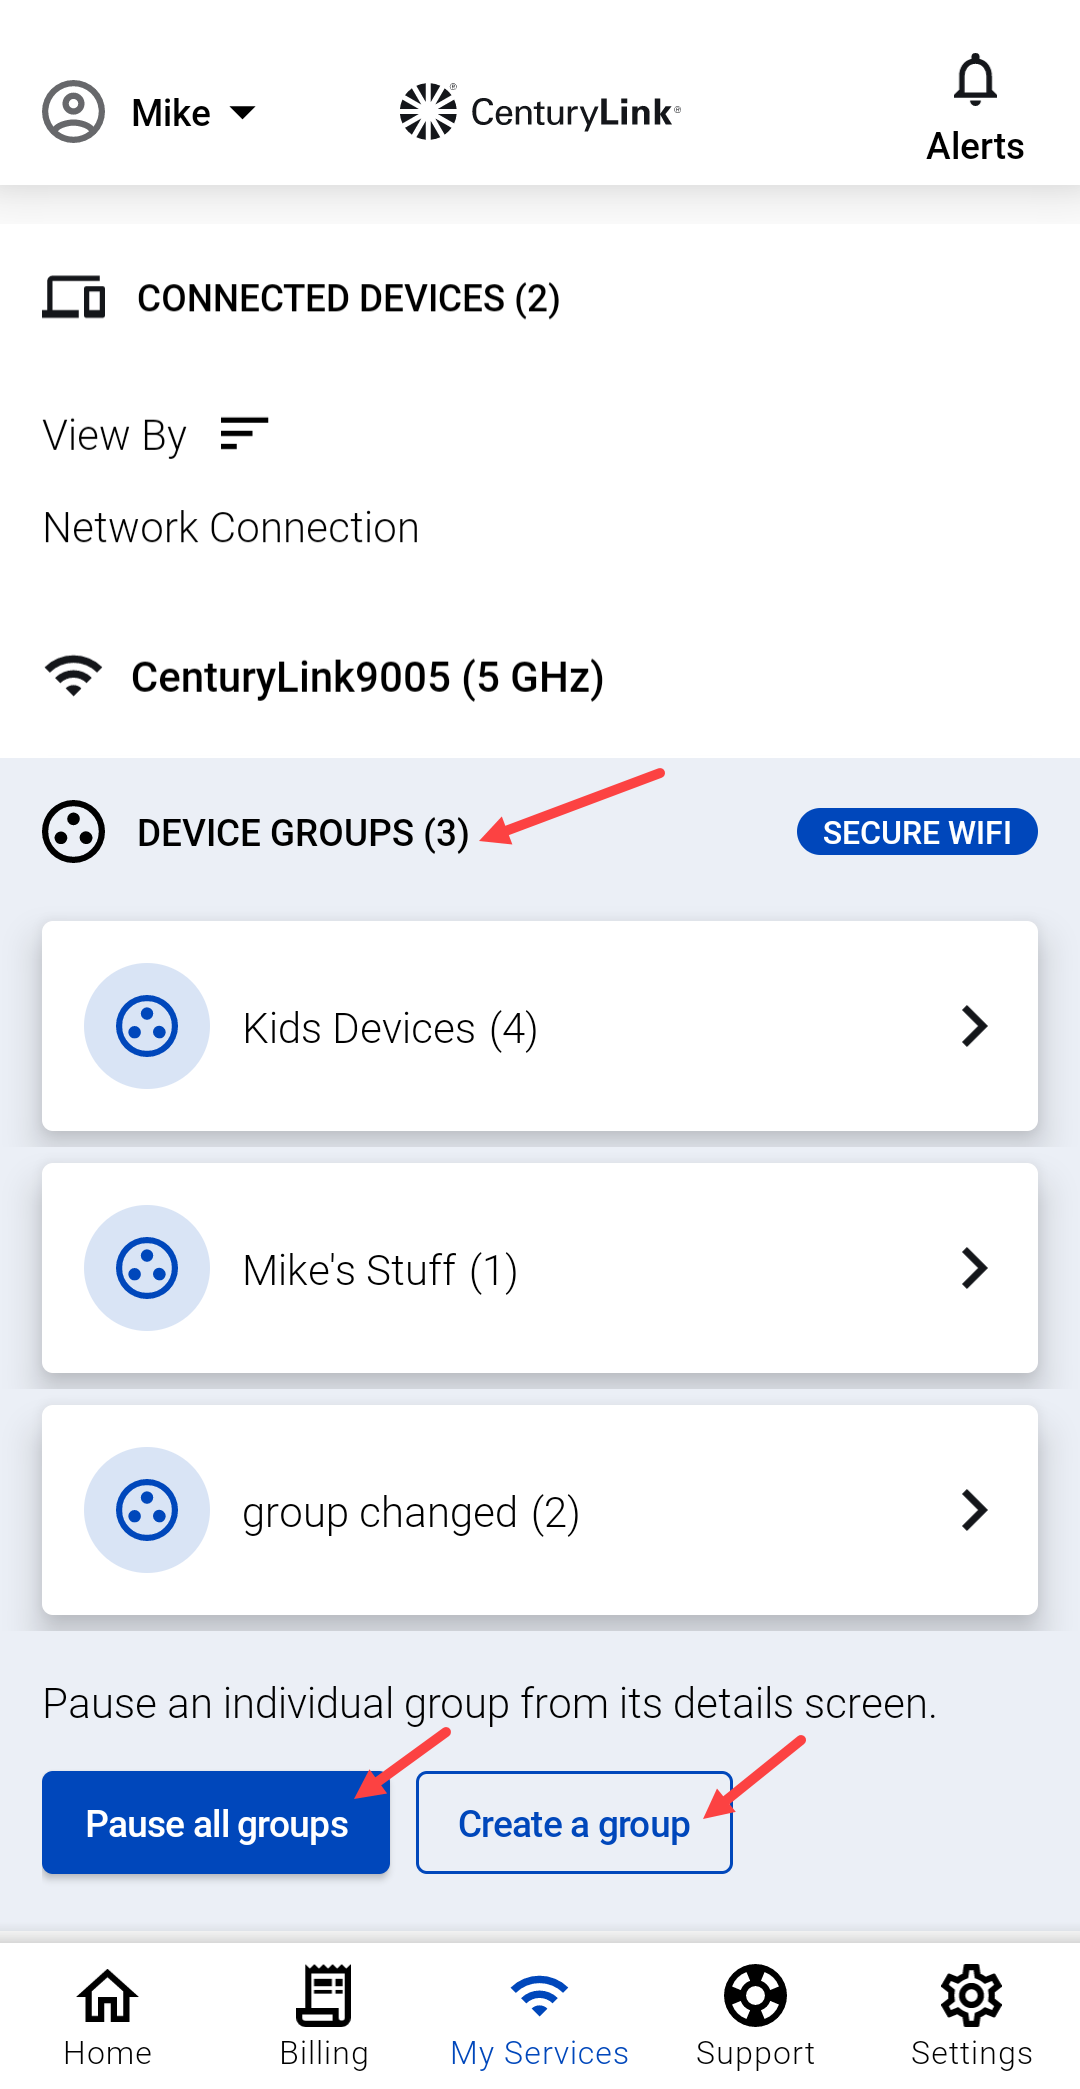 Internet screen of app showing device groups for Secure WiFi